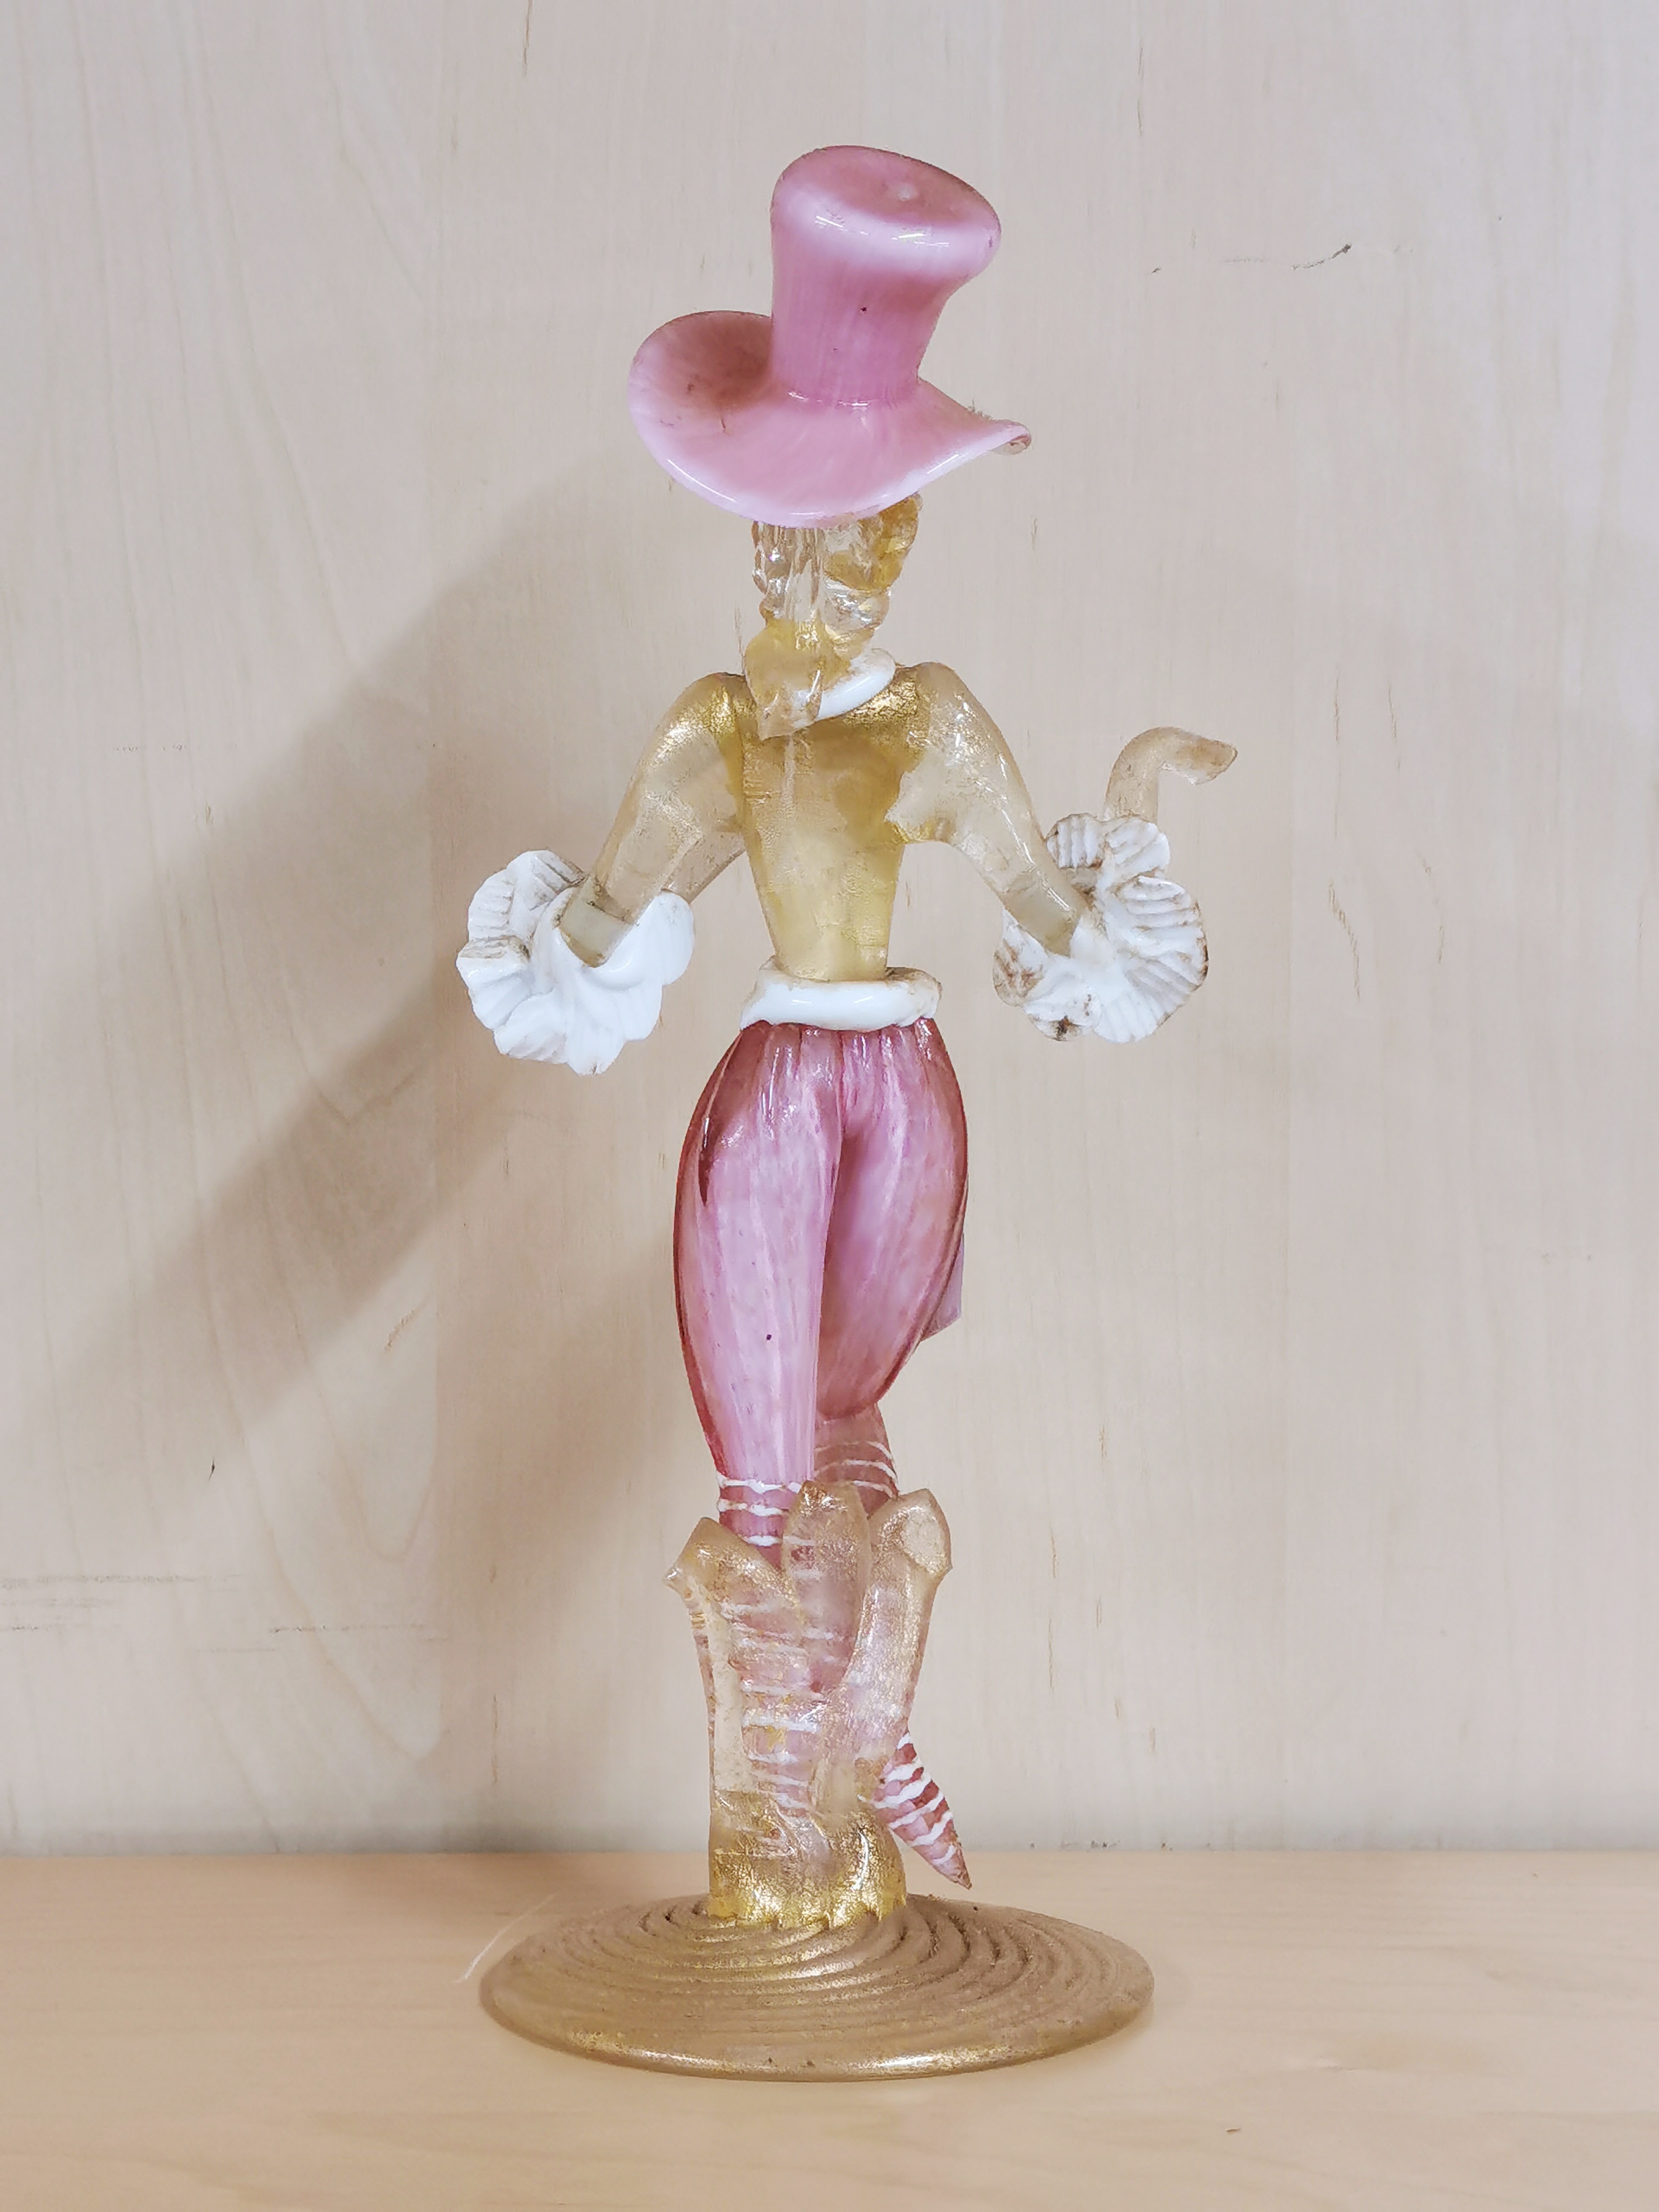 A lovely early Murano glass figure of a dancer, H. 26cm. Condition: no visible damage or repair. - Image 2 of 3